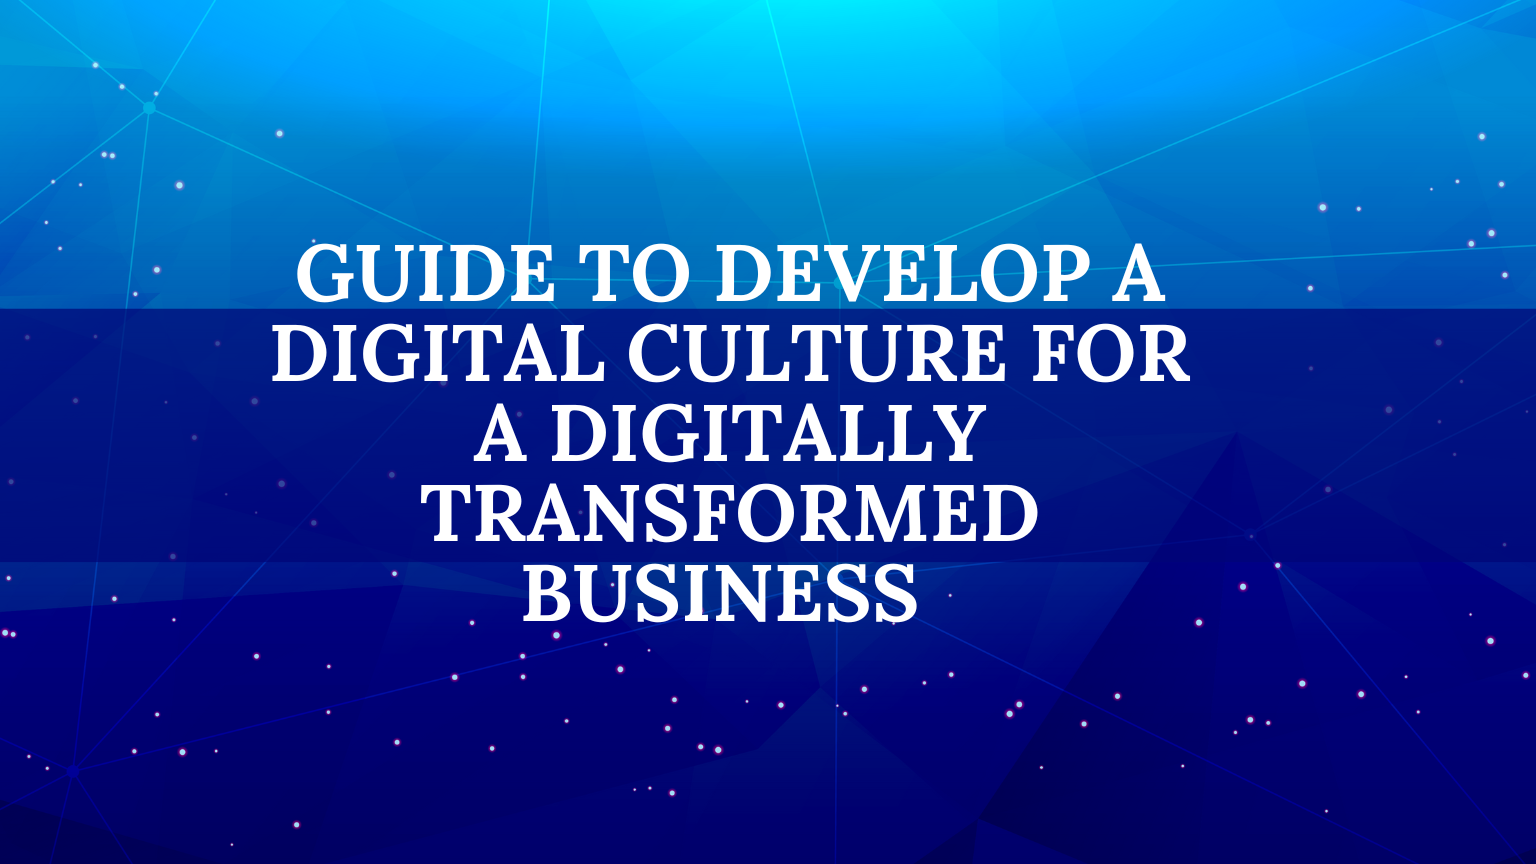 Guide-to-Develop-a-Digital-Culture-for-a-Digitally-Transformed-Business.png